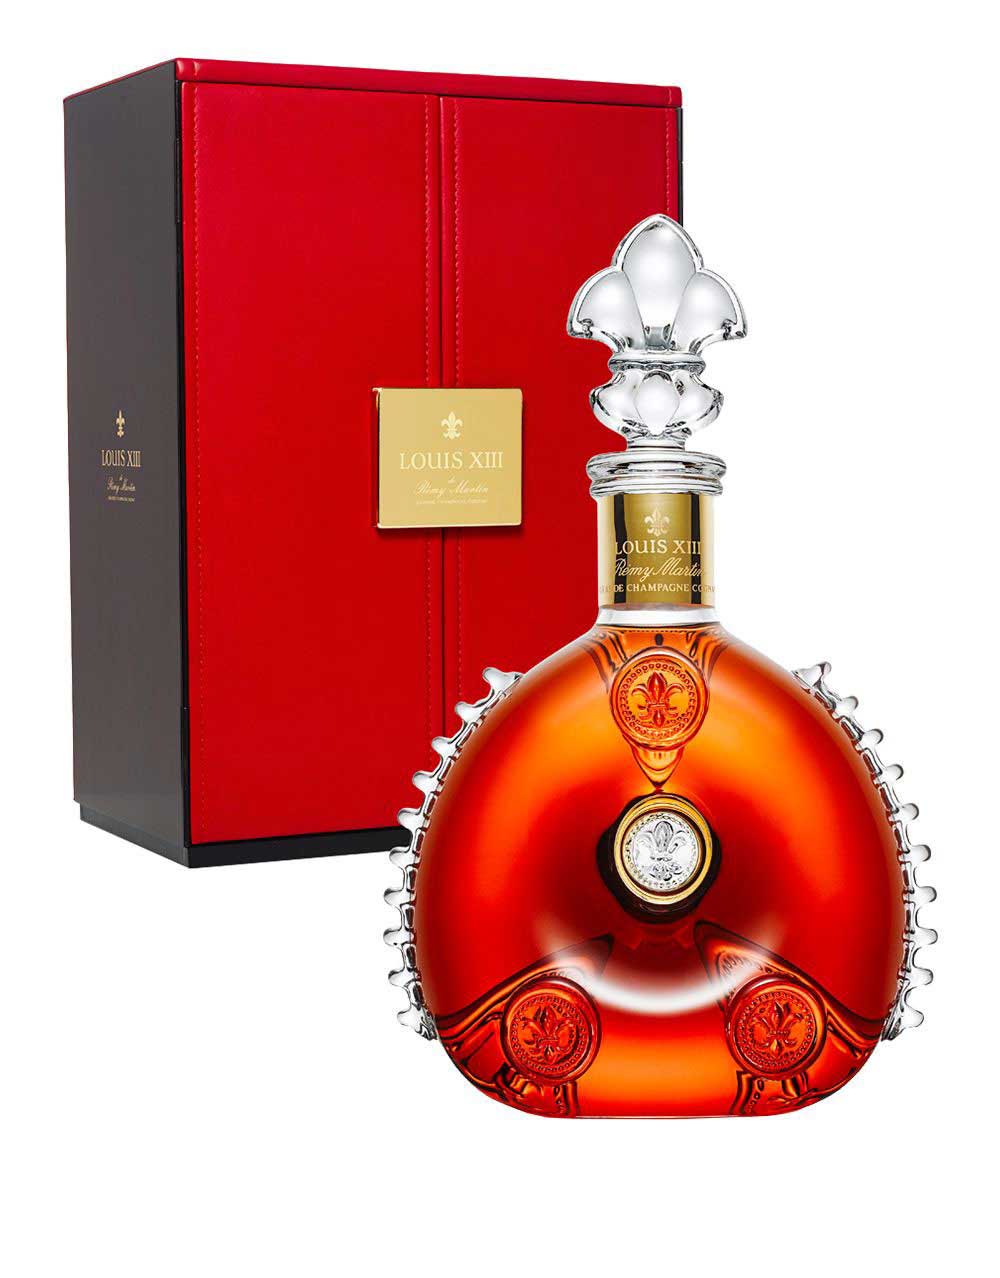 Remy martin LOUIS XIII Magnum